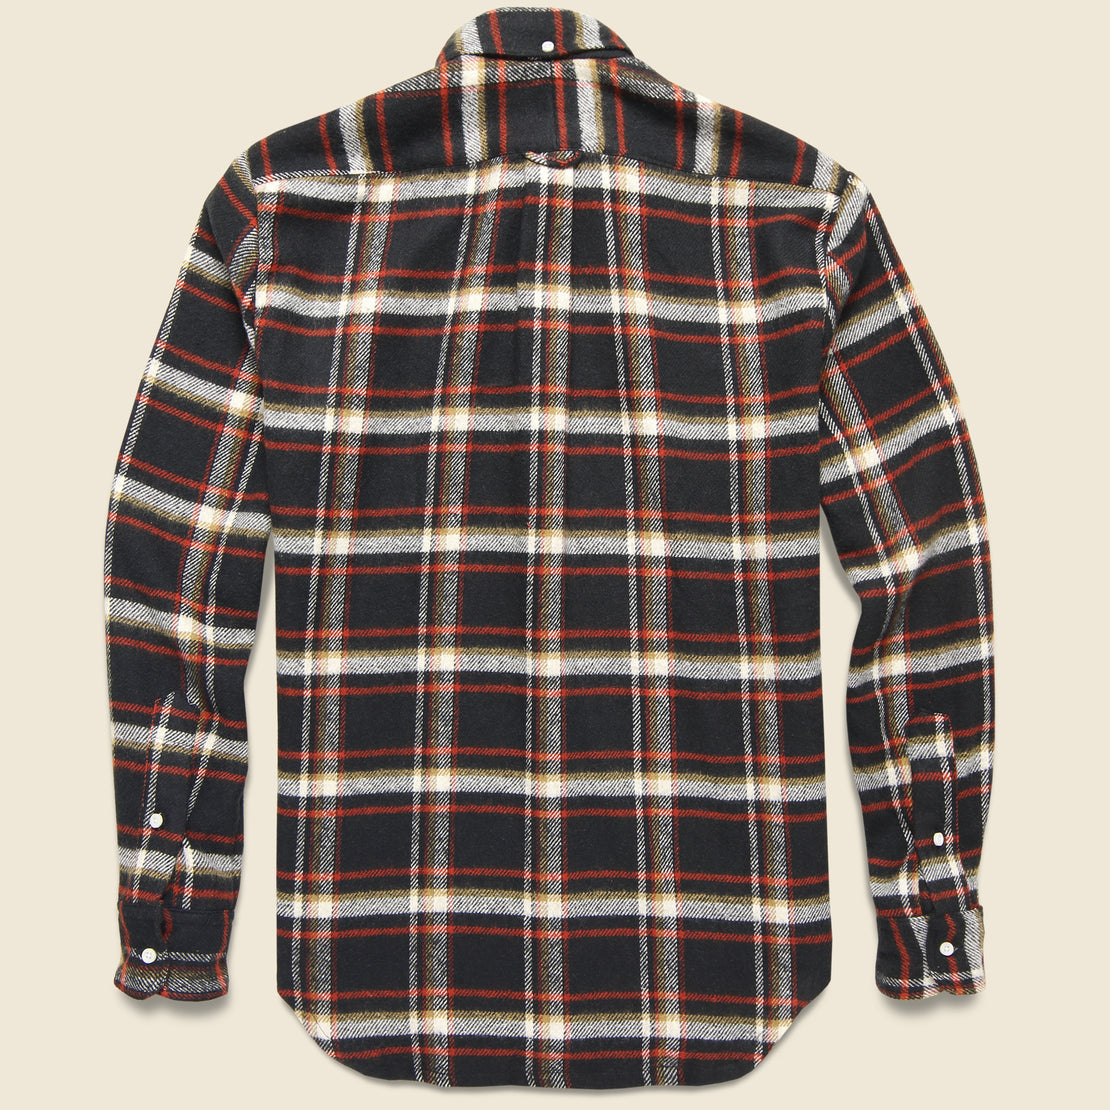 Country Plaid Shirt - Red